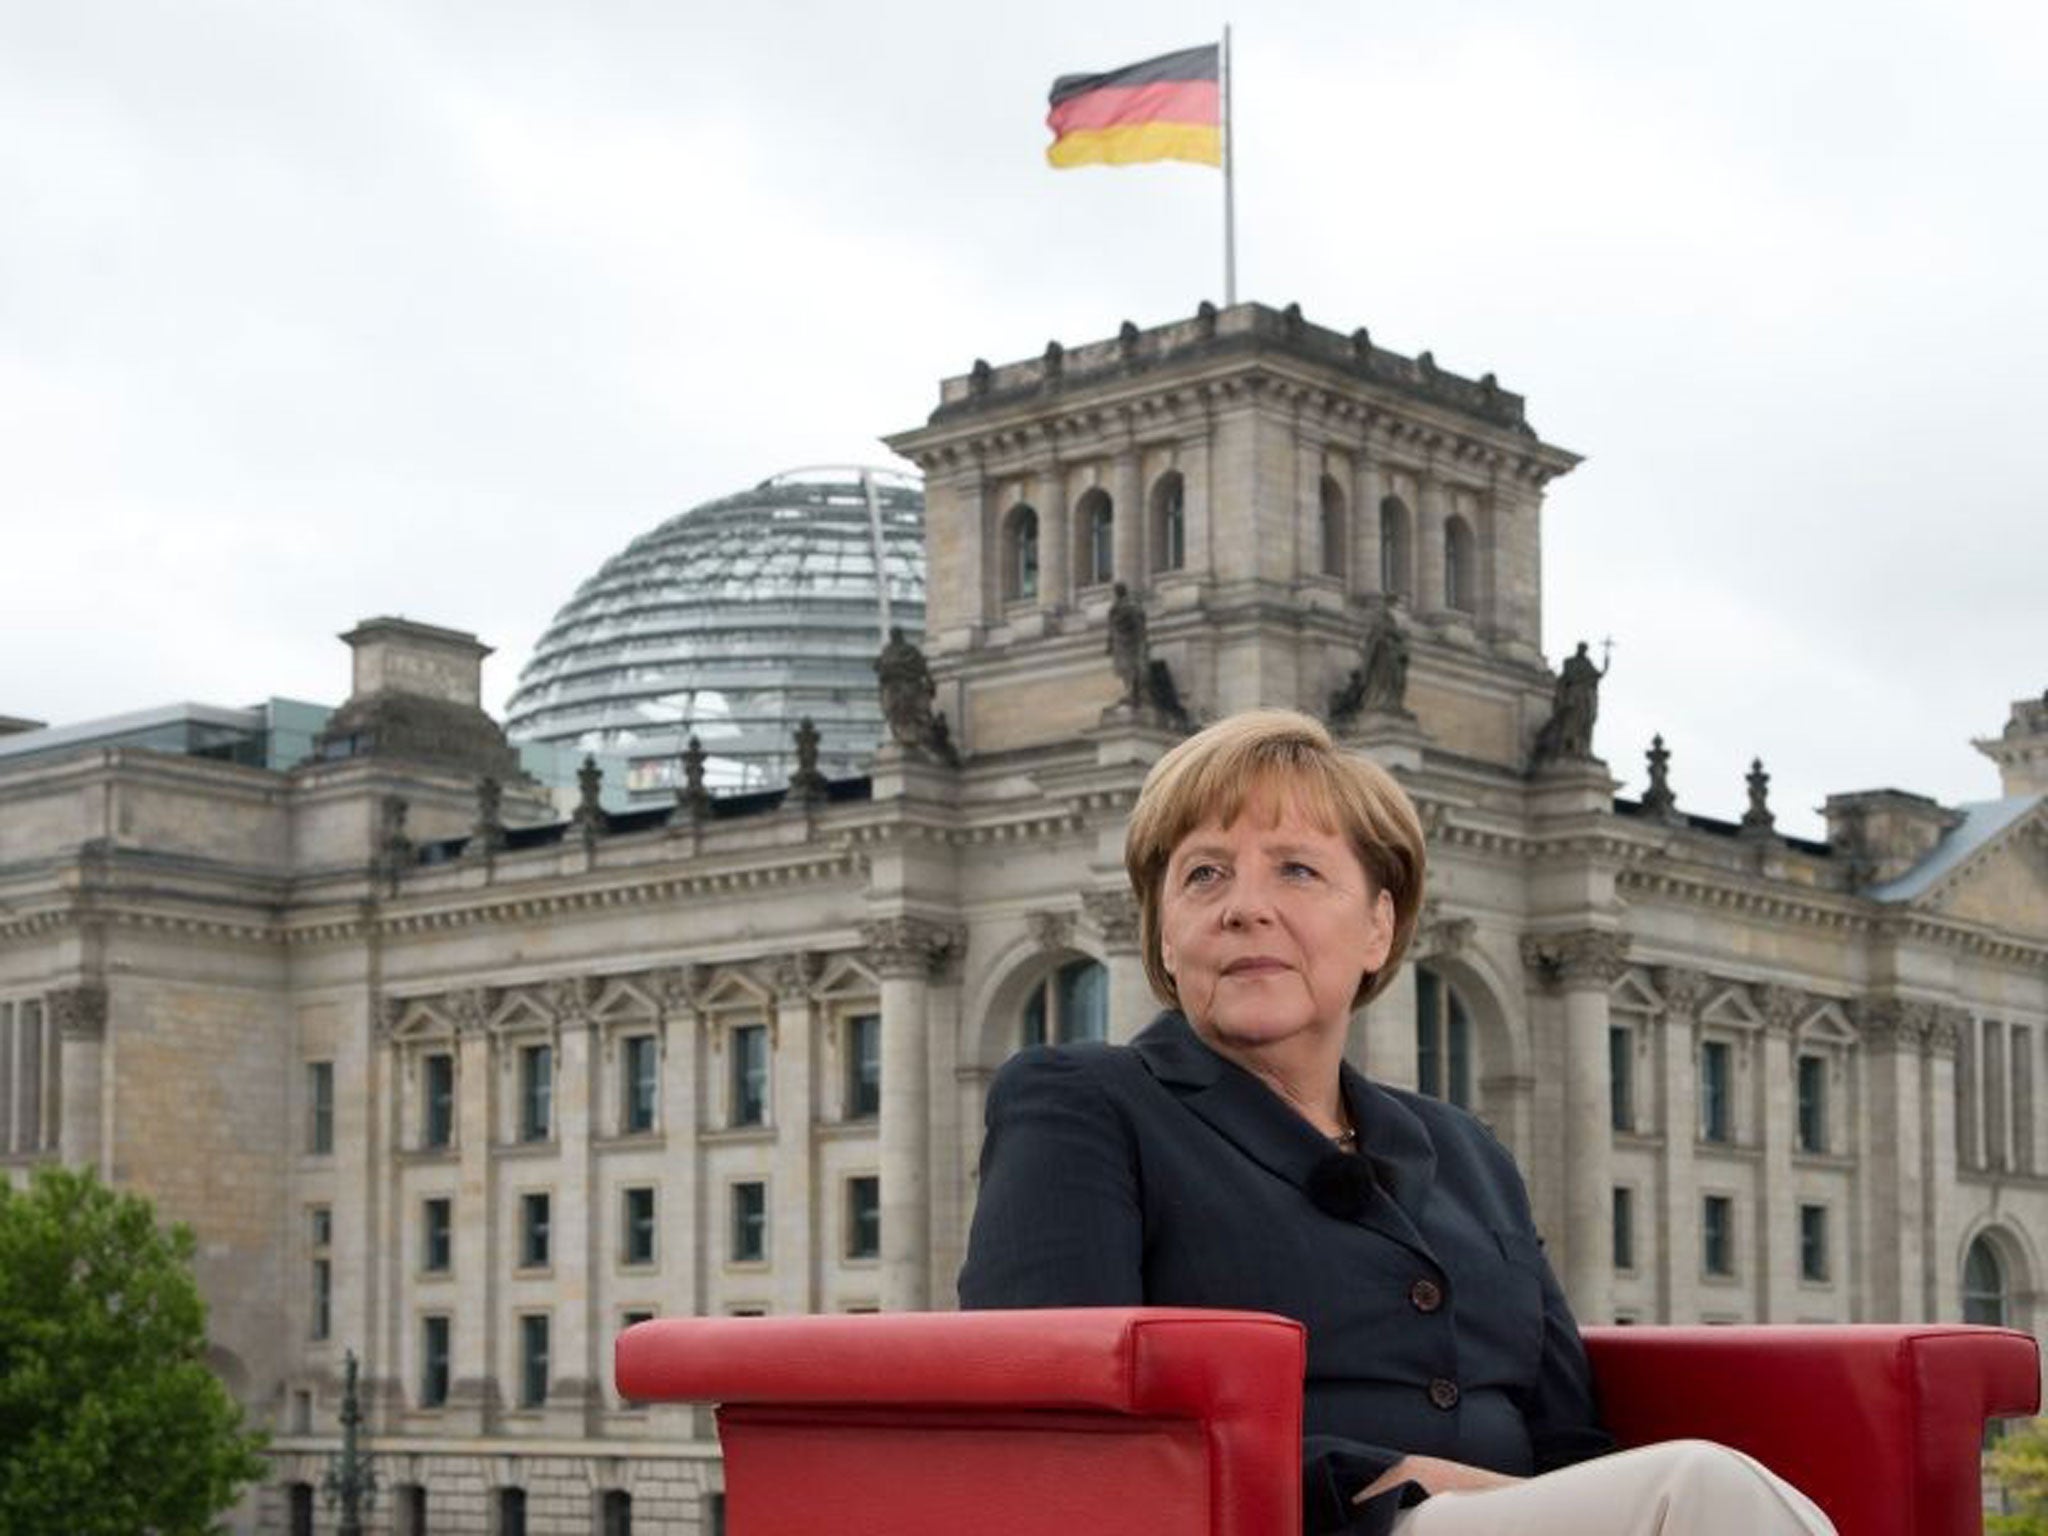 Merkel called for tighter data protection regulations during an interview with ARD television on Sunday